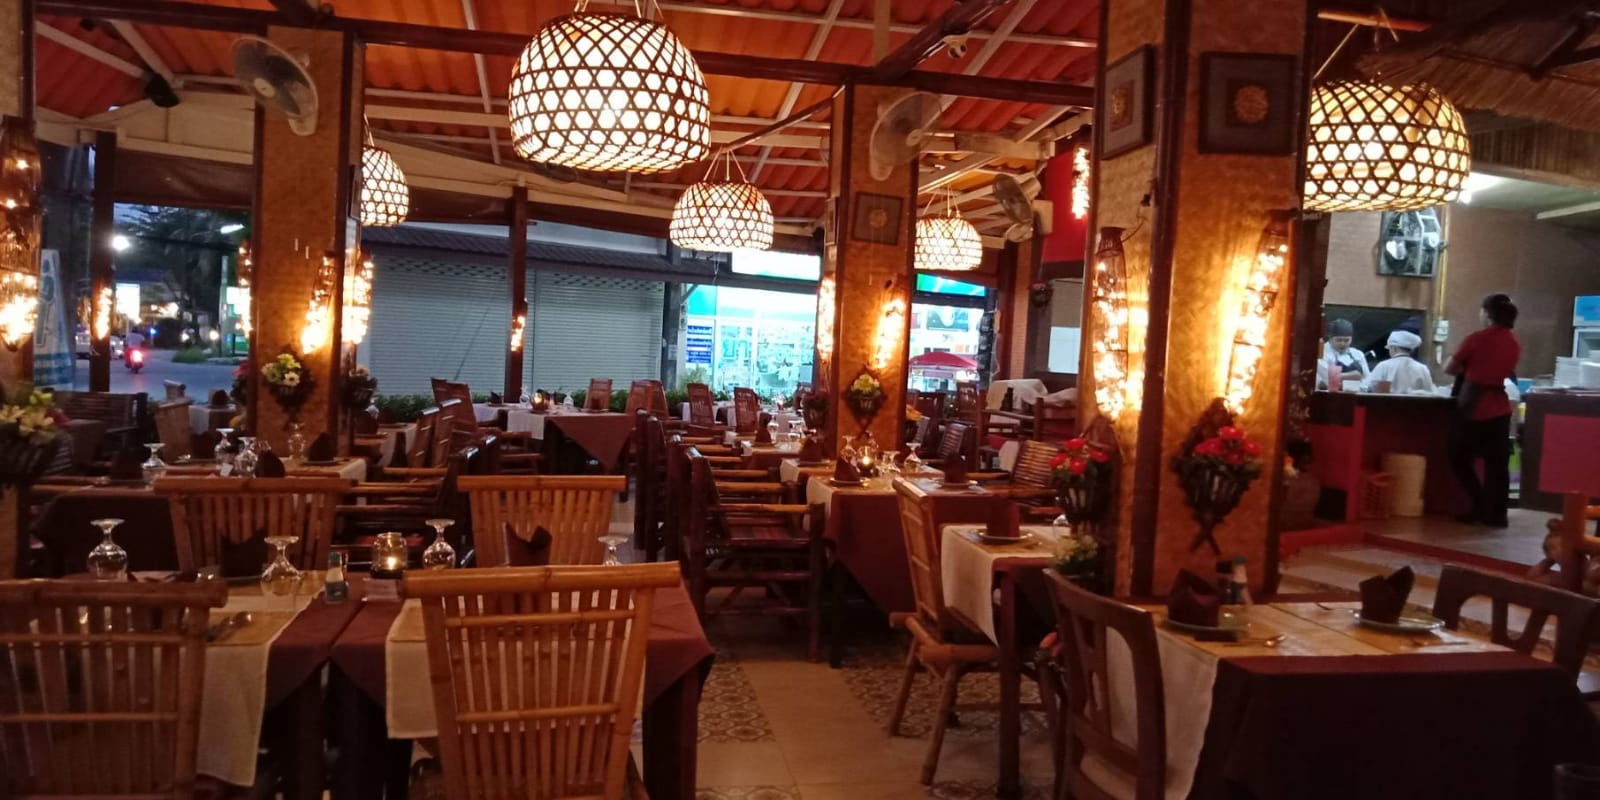 Niang Restaurant and Land (14)